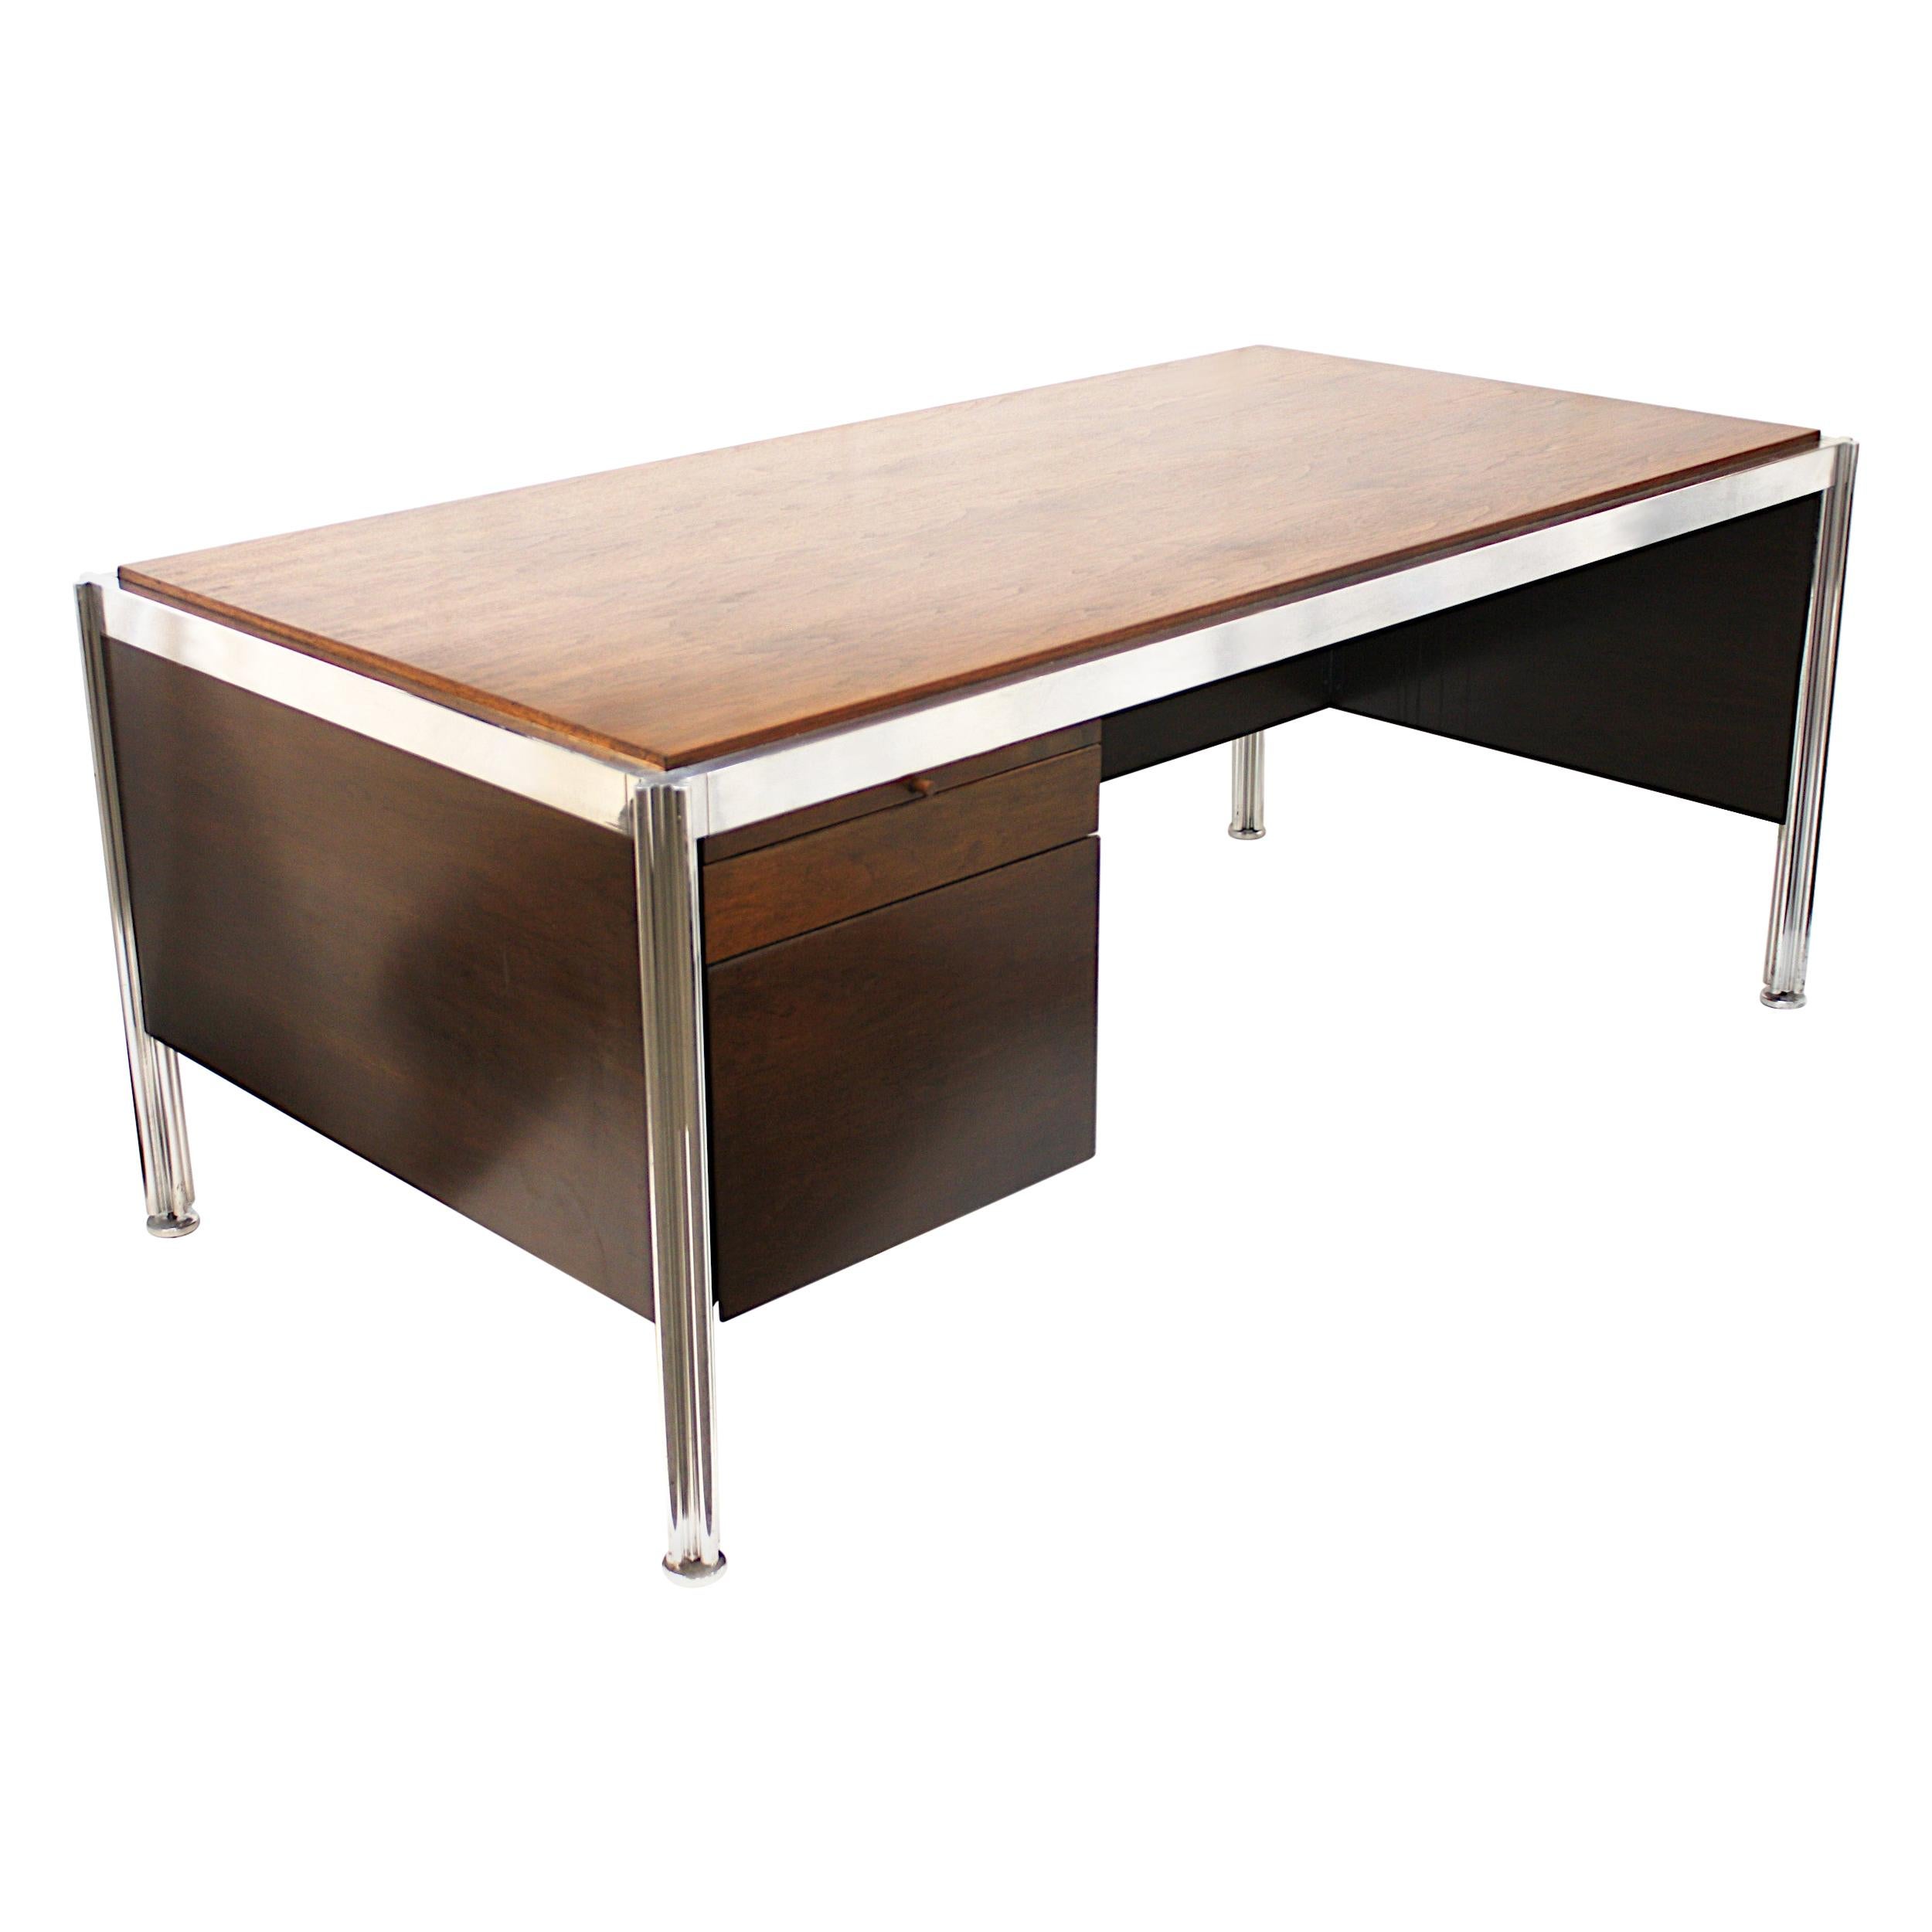 1970s Mid-Century Modern Walnut and Aluminum Executive Desk by George Ciancimino